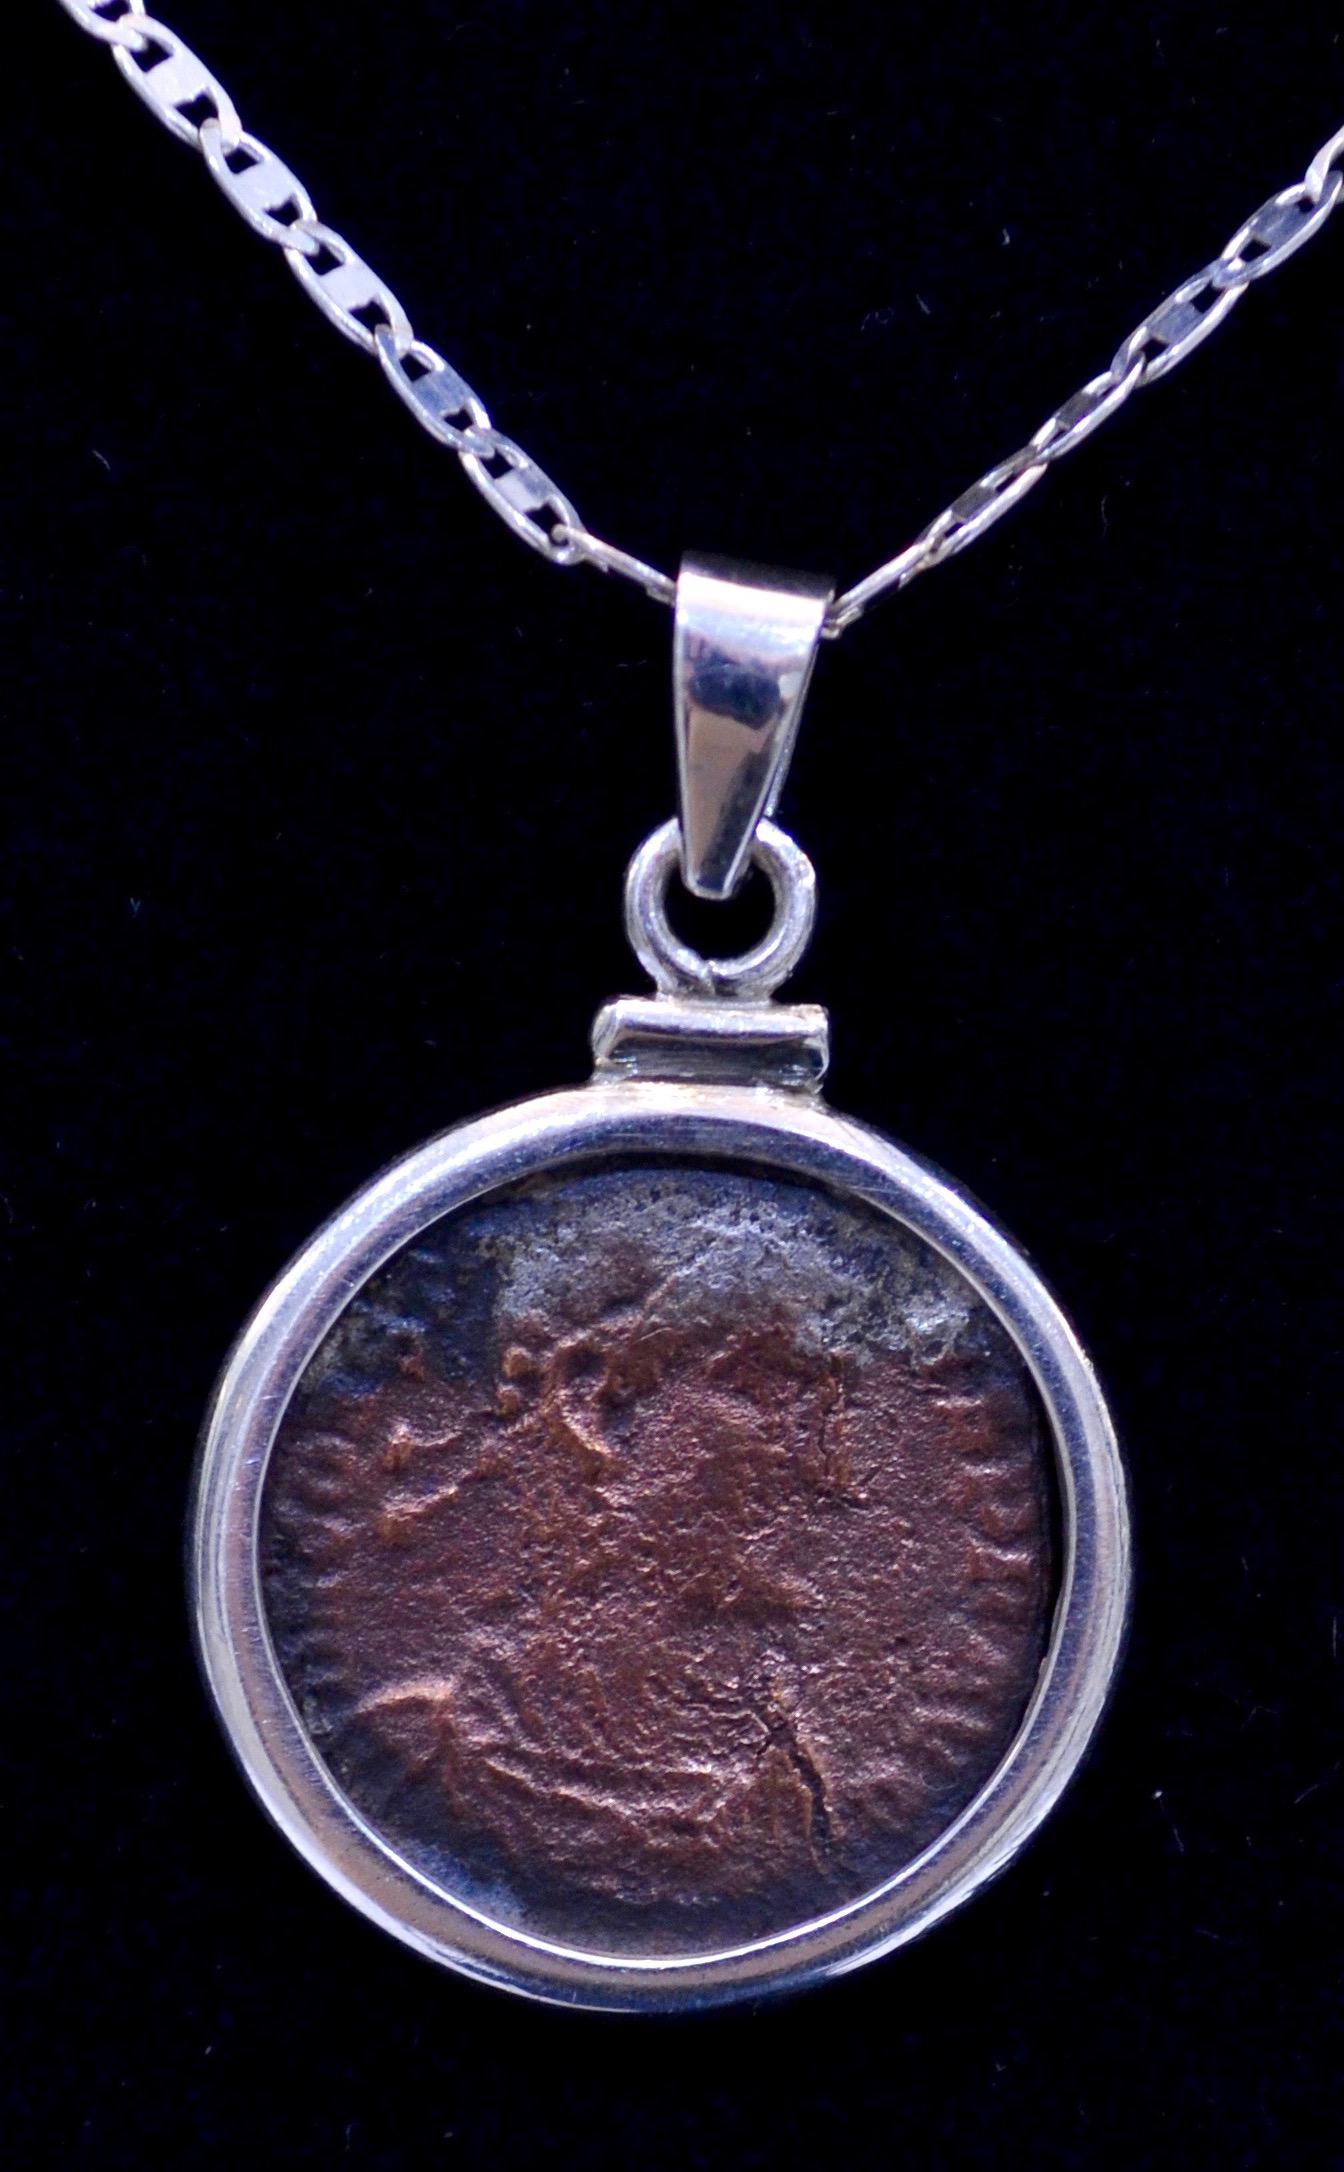 Authentic  roman bronze coin Ca. 337-350 CE mounted on contemporary silver necklace. Ready to be worn!

Flavius Julius Constans, the youngest son of Constantine the Great, he adopted the title of Augustus (along with his 2 brothers - Constantius II